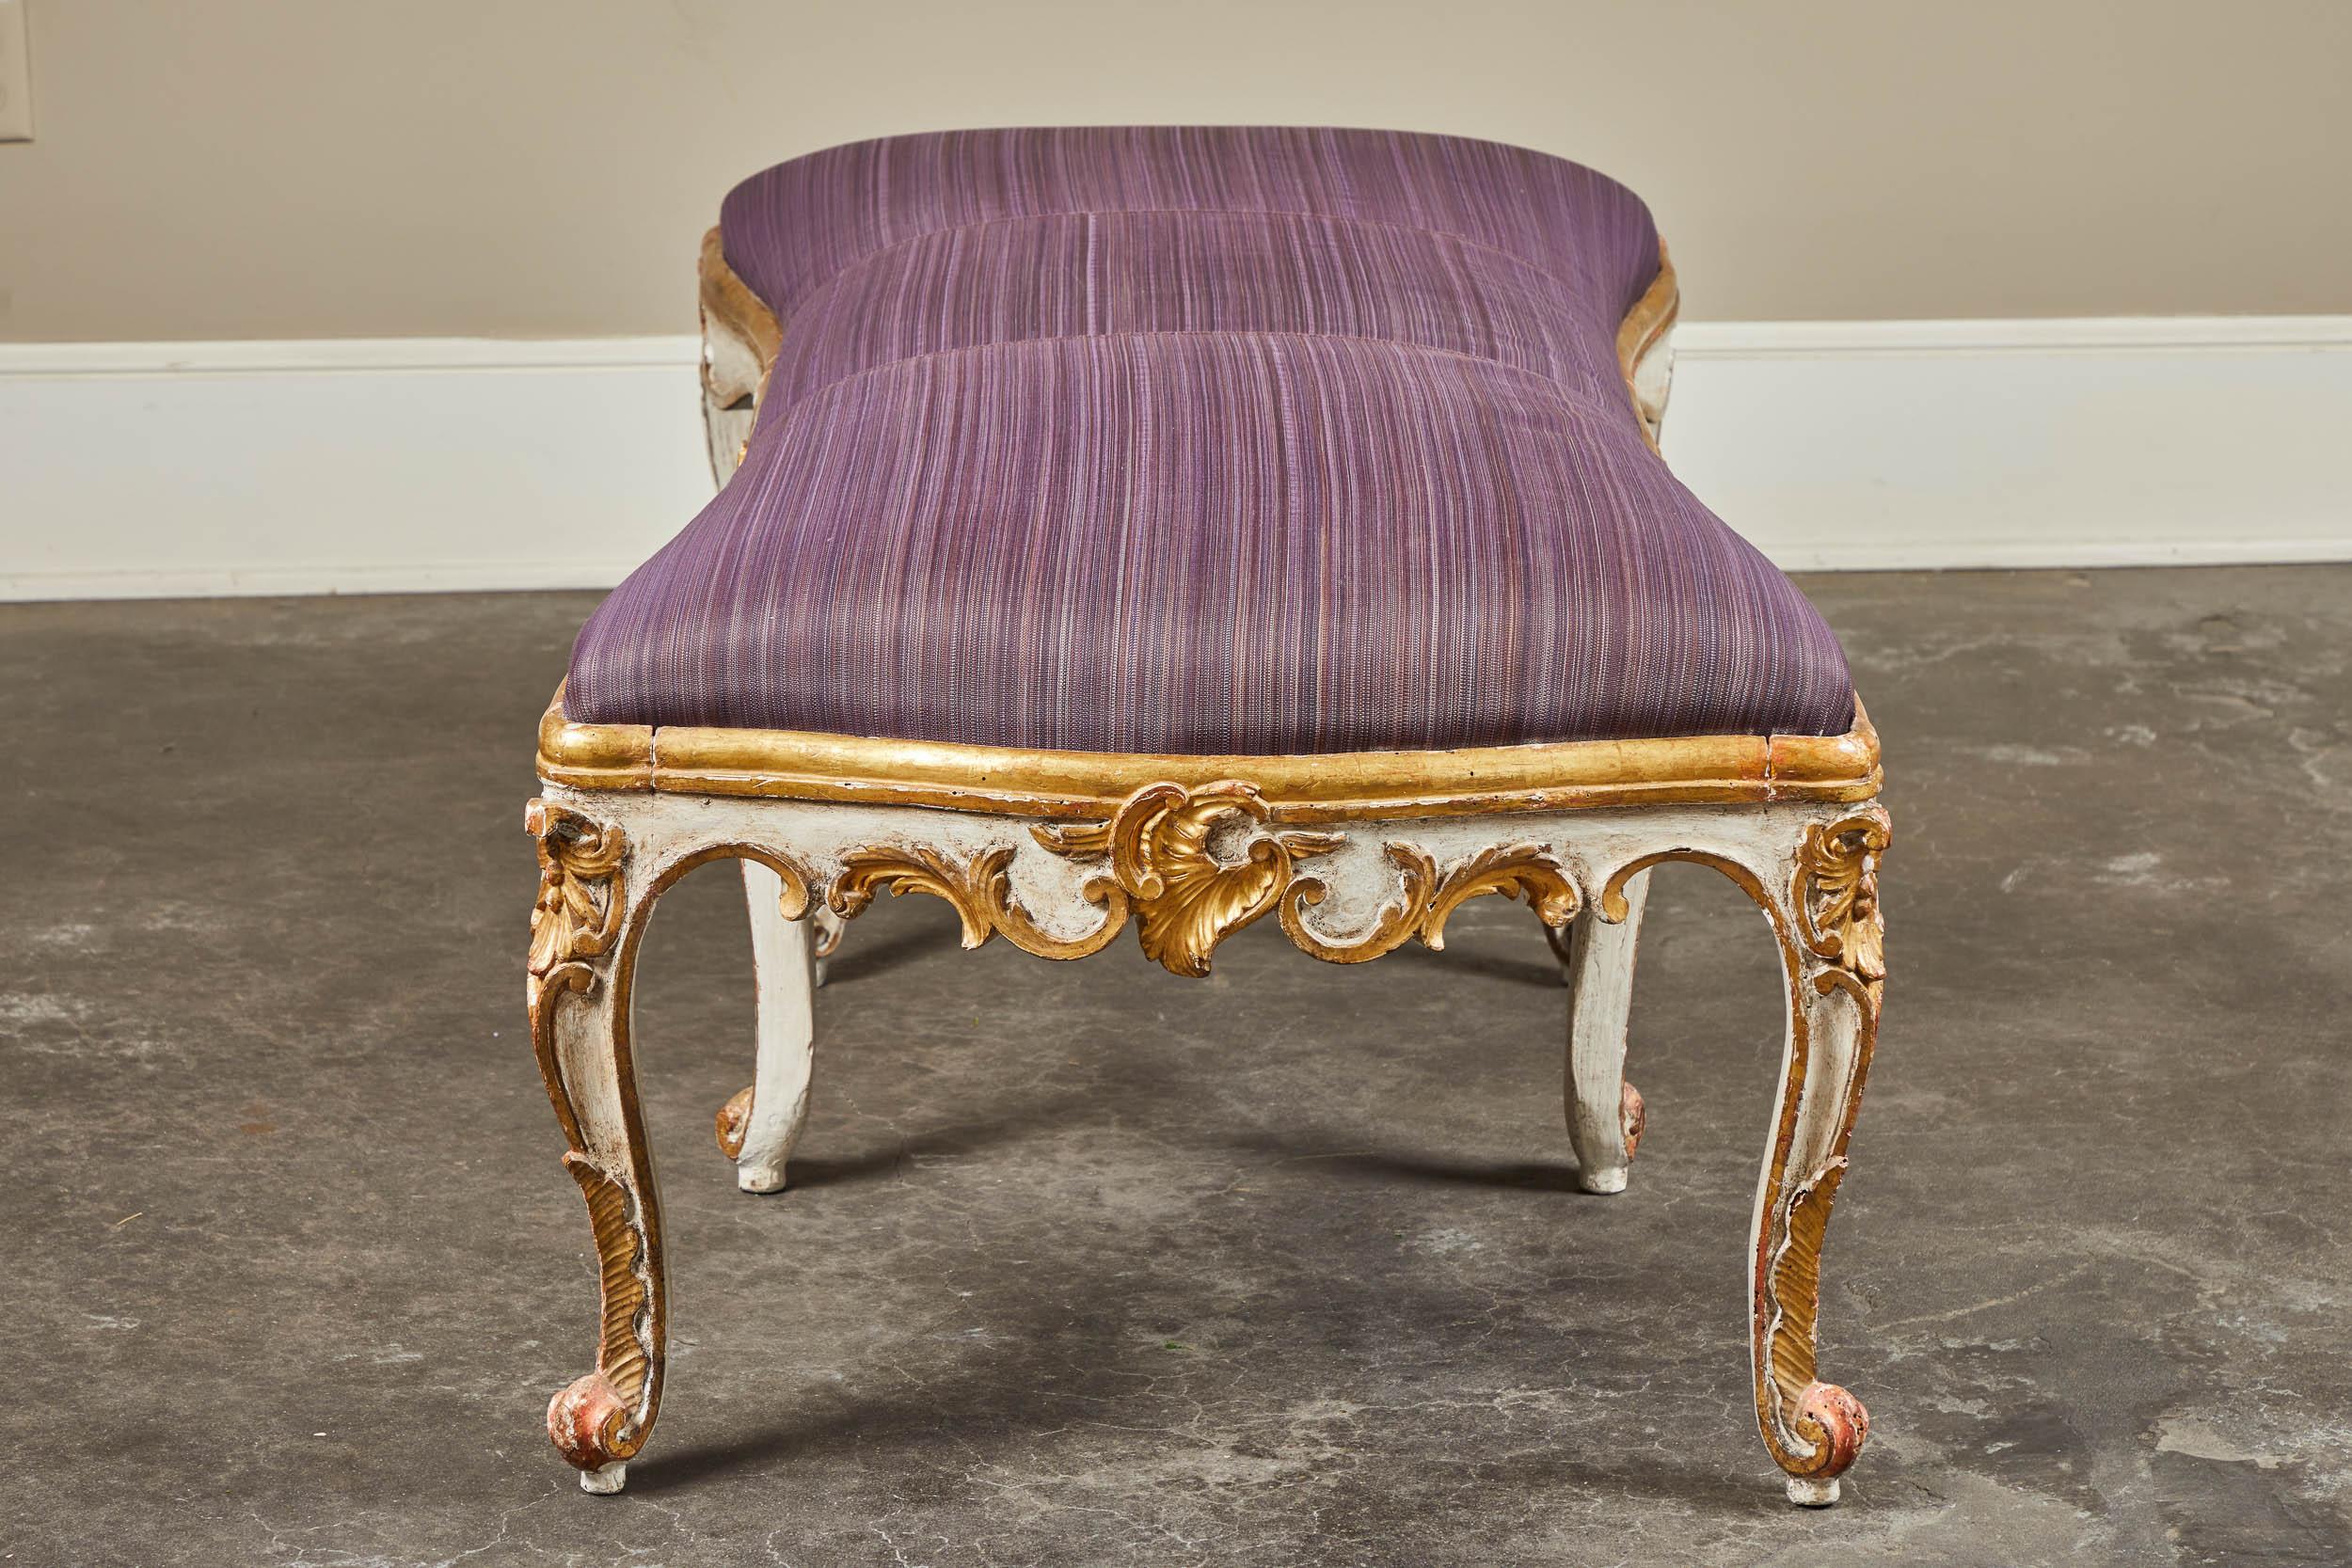 Wood 18th Century Italian Bench with Horsehair Upholstery